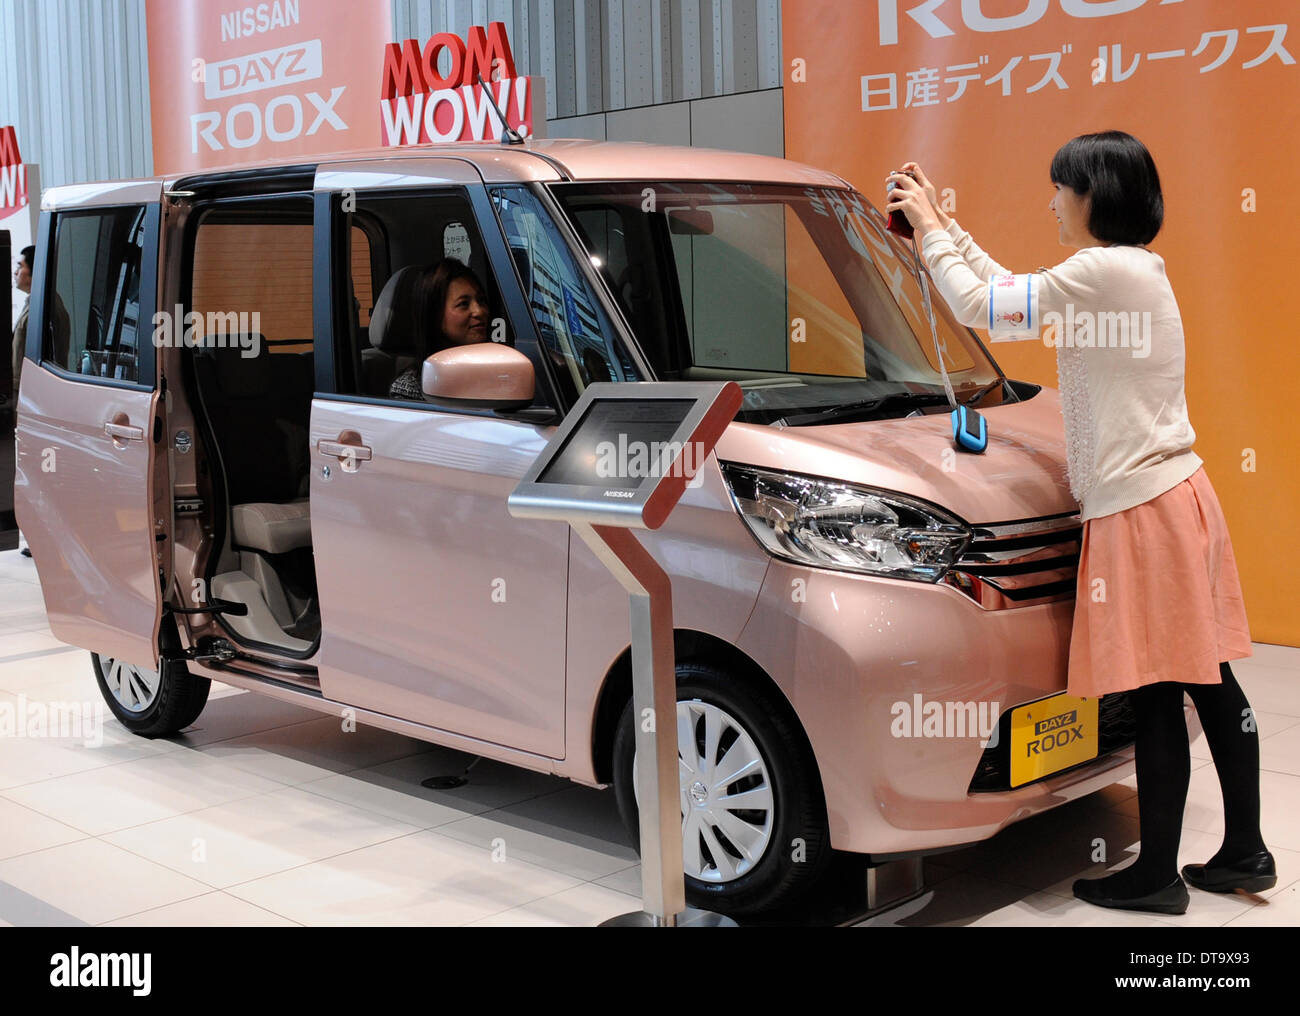 Yokohama, Japan. 13th Feb, 2014. People pose for photos with Japan's auto giant Nissan's new model Dayz Roox at the headquarters of Nissan Motor in Yokohama, Japan, Feb. 13, 2014. Nissan's Dayz Roox was released on Thursday throughout Japan. © Stringer/Xinhua/Alamy Live News Stock Photo